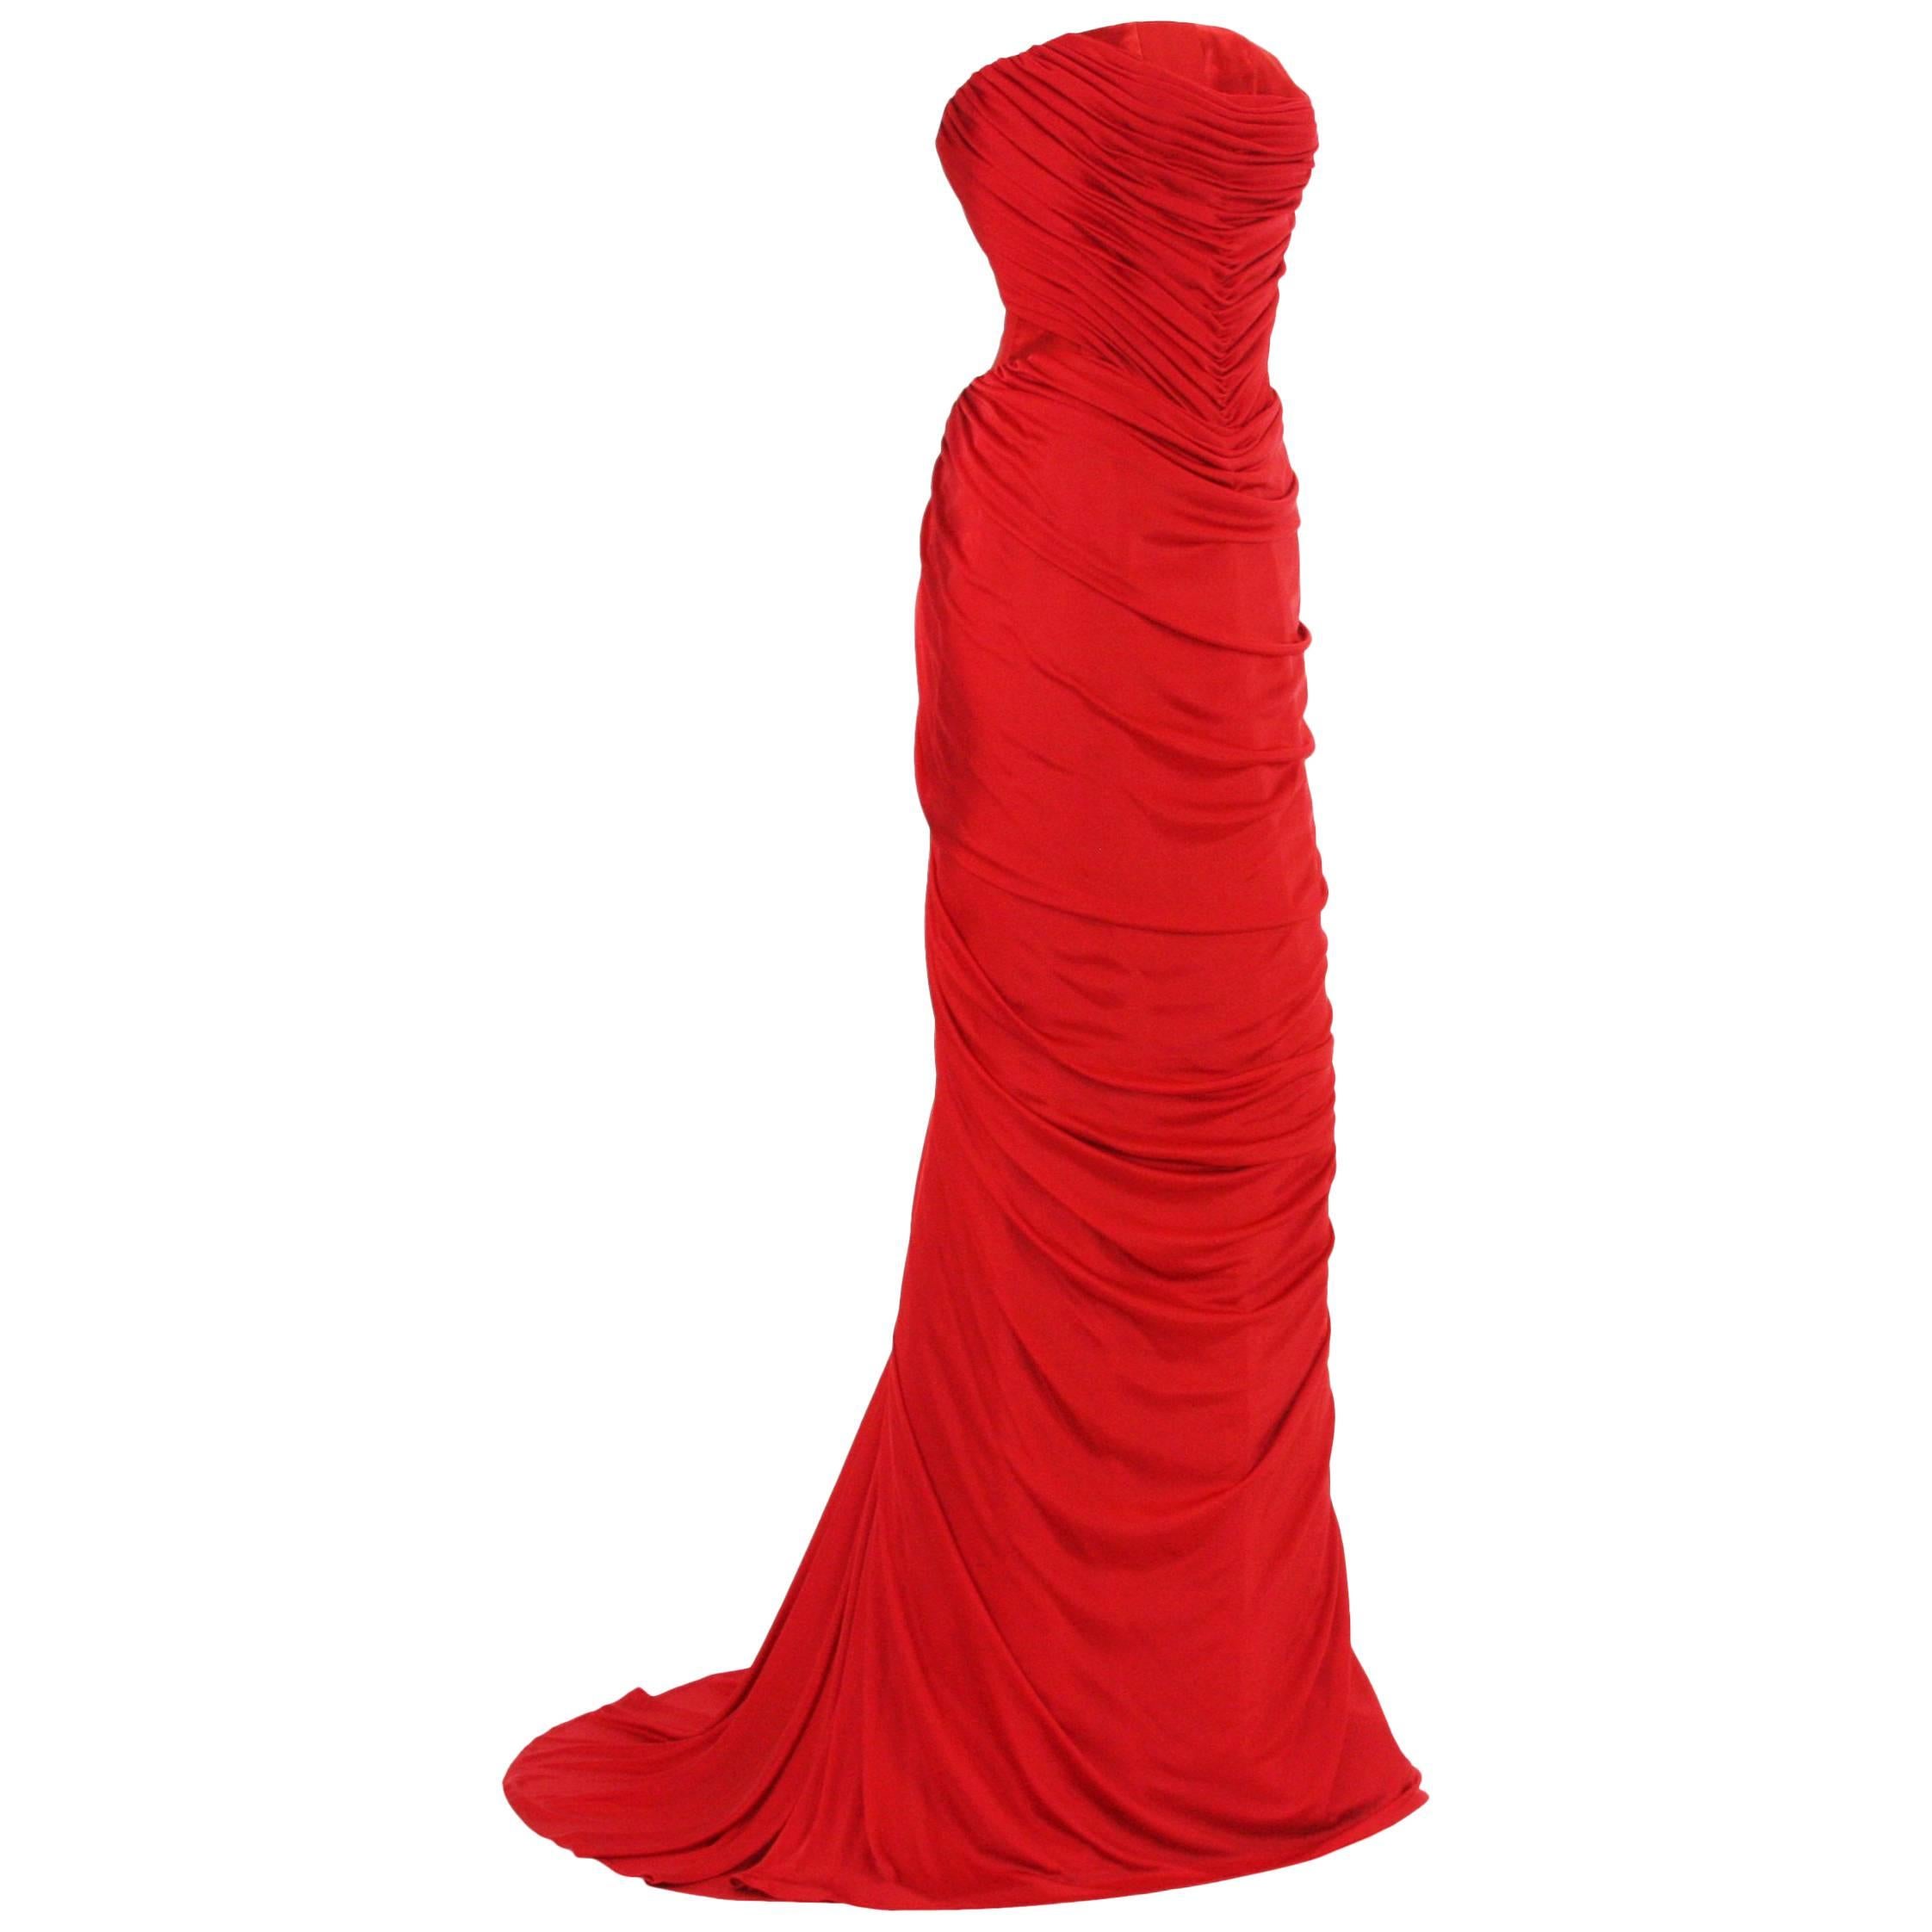 New Gianni Versace Couture 90's Lipstick Red Jersey Embellished Dress Gown 4